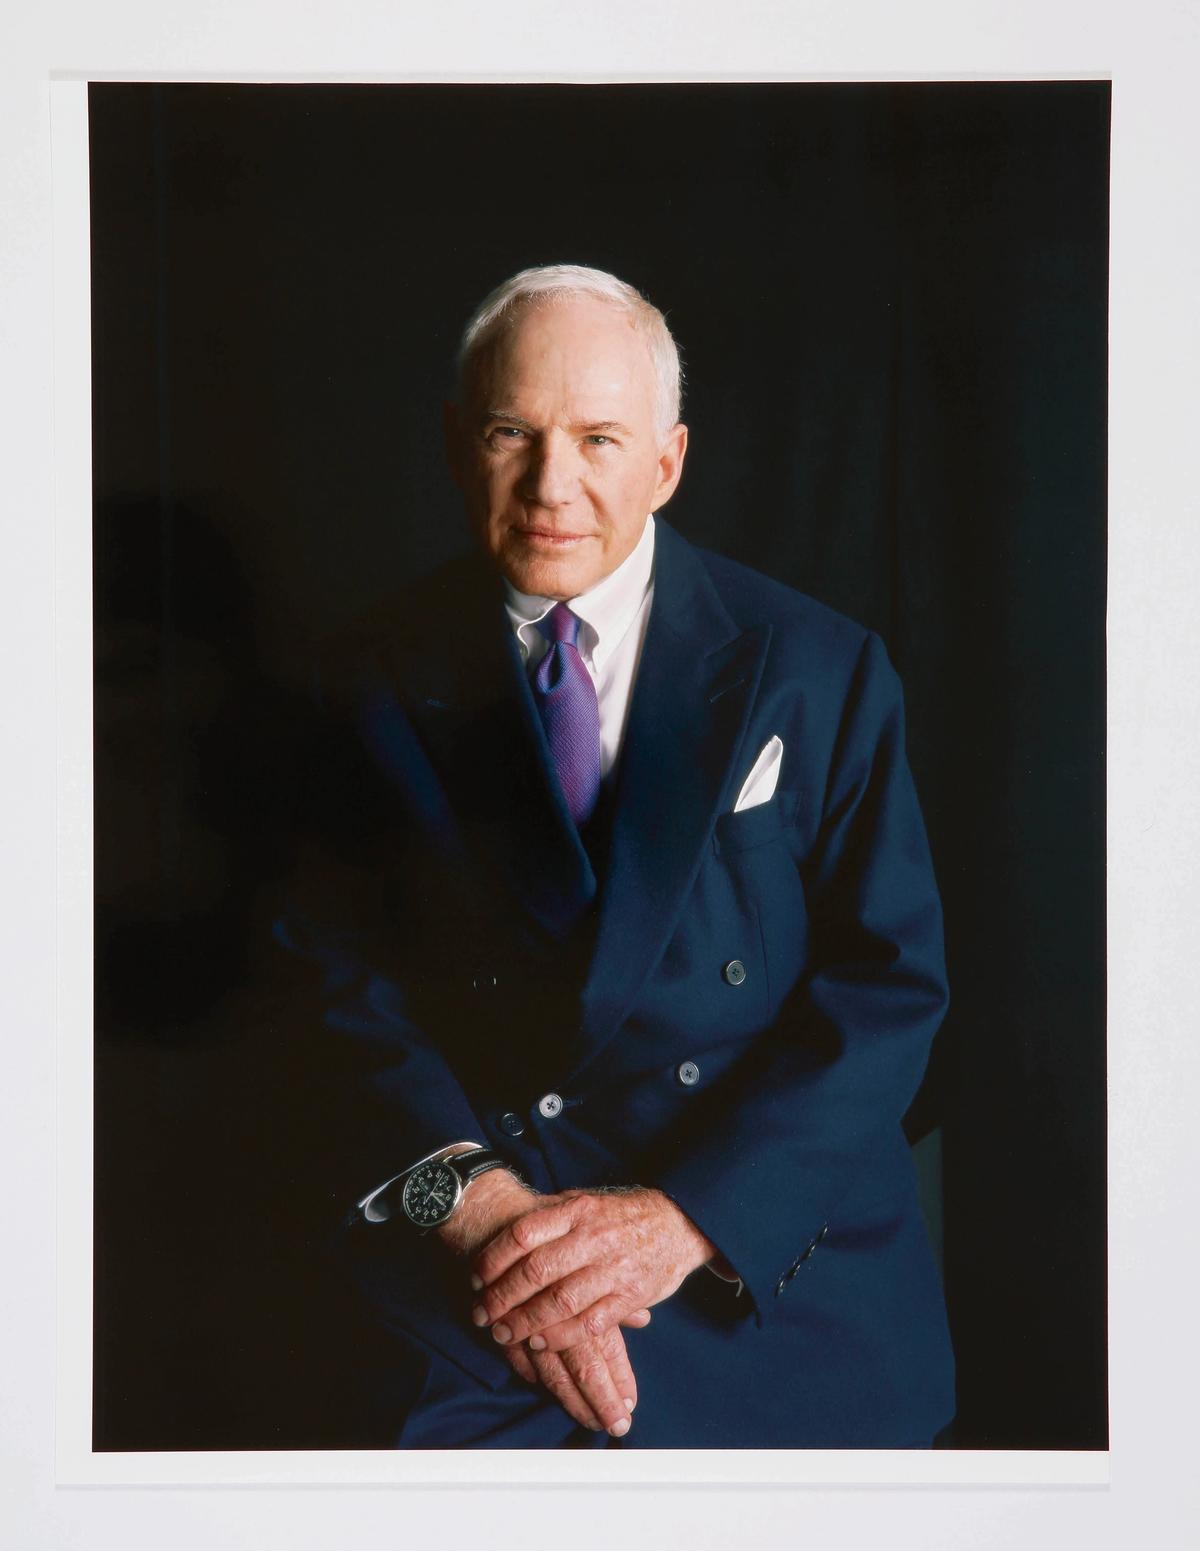 The American collector David Teiger Courtesy of Sotheby's